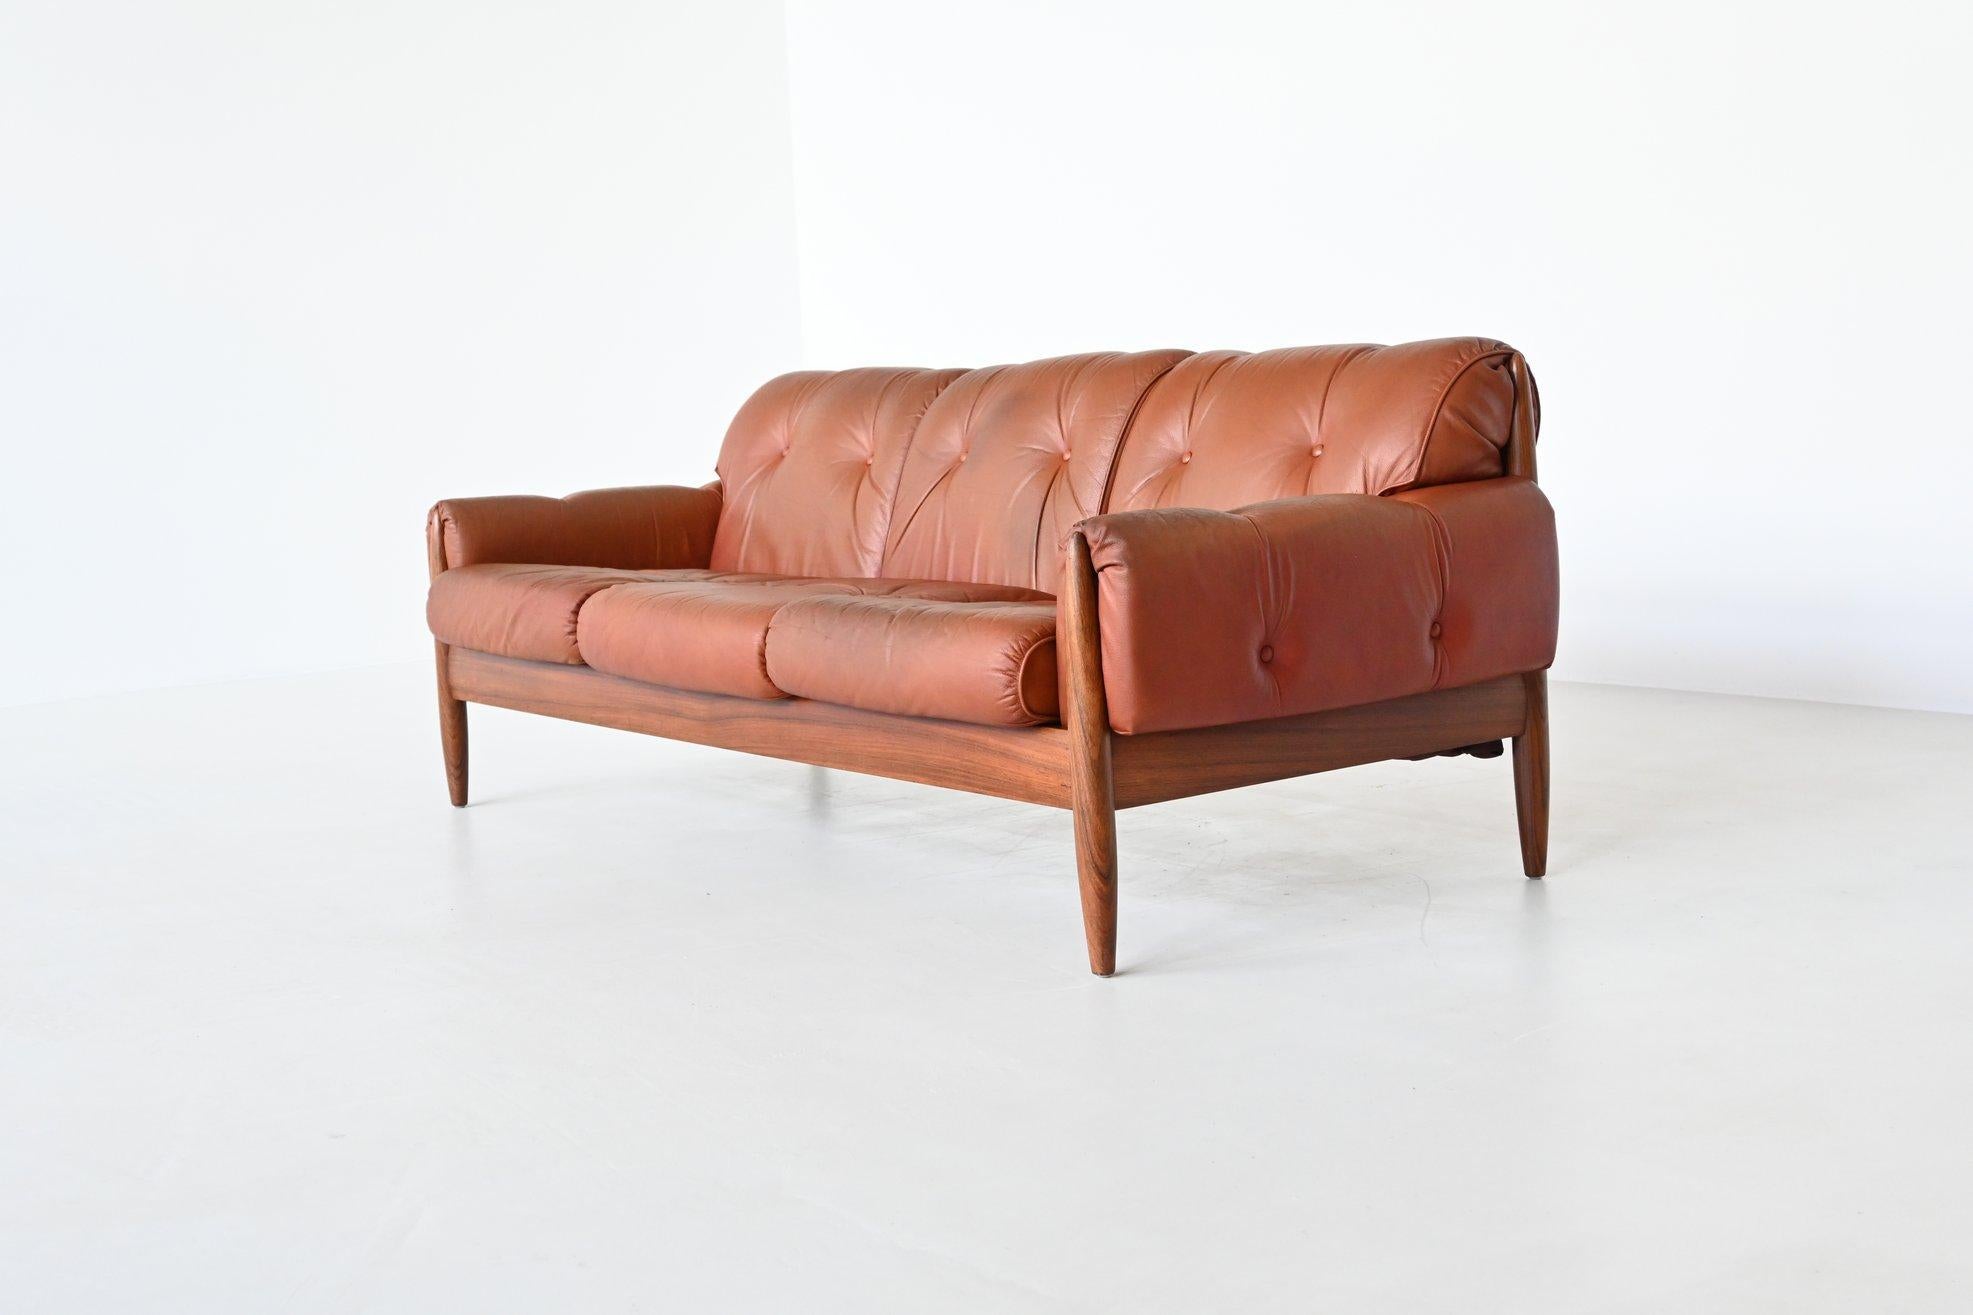 Beautiful shaped Scandinavian lounge sofa, Denmark 1960. This unique three-seater sofa has a solid rosewood frame with cognac leather cushions. Very nice details are the well-crafted tapered legs and high quality original leather. This amazing sofa